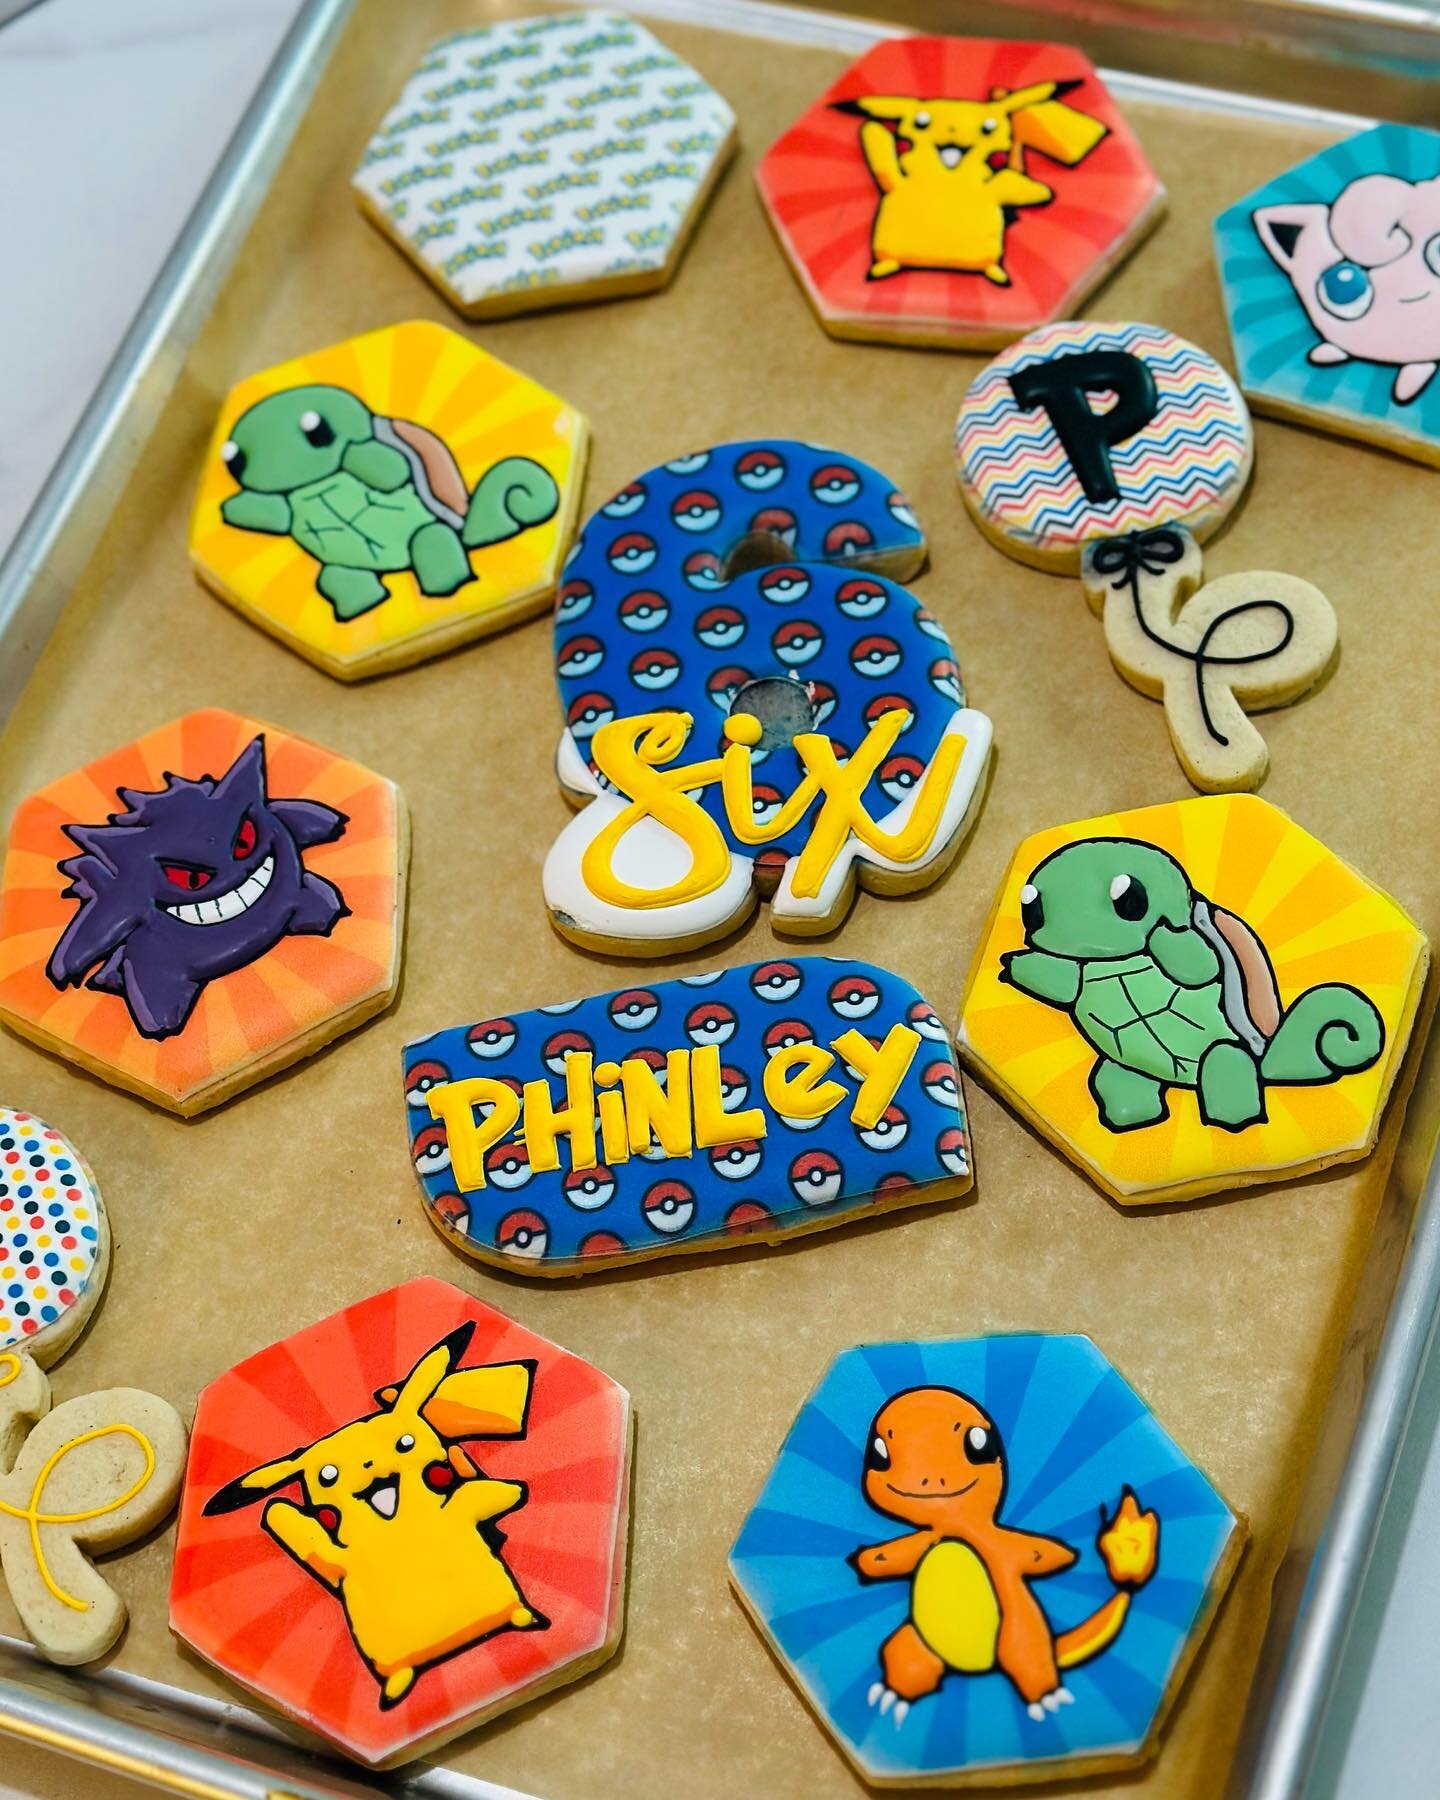 Happy 6th birthday, Phinley! These Japanese media franchise inspired cookies were so fun to make! Being able to print vibrant backgrounds to work on makes decorating so much easier. #SugarCookies #Homemade #RoyalIcing #CustomCookies #HandDecoratedCoo